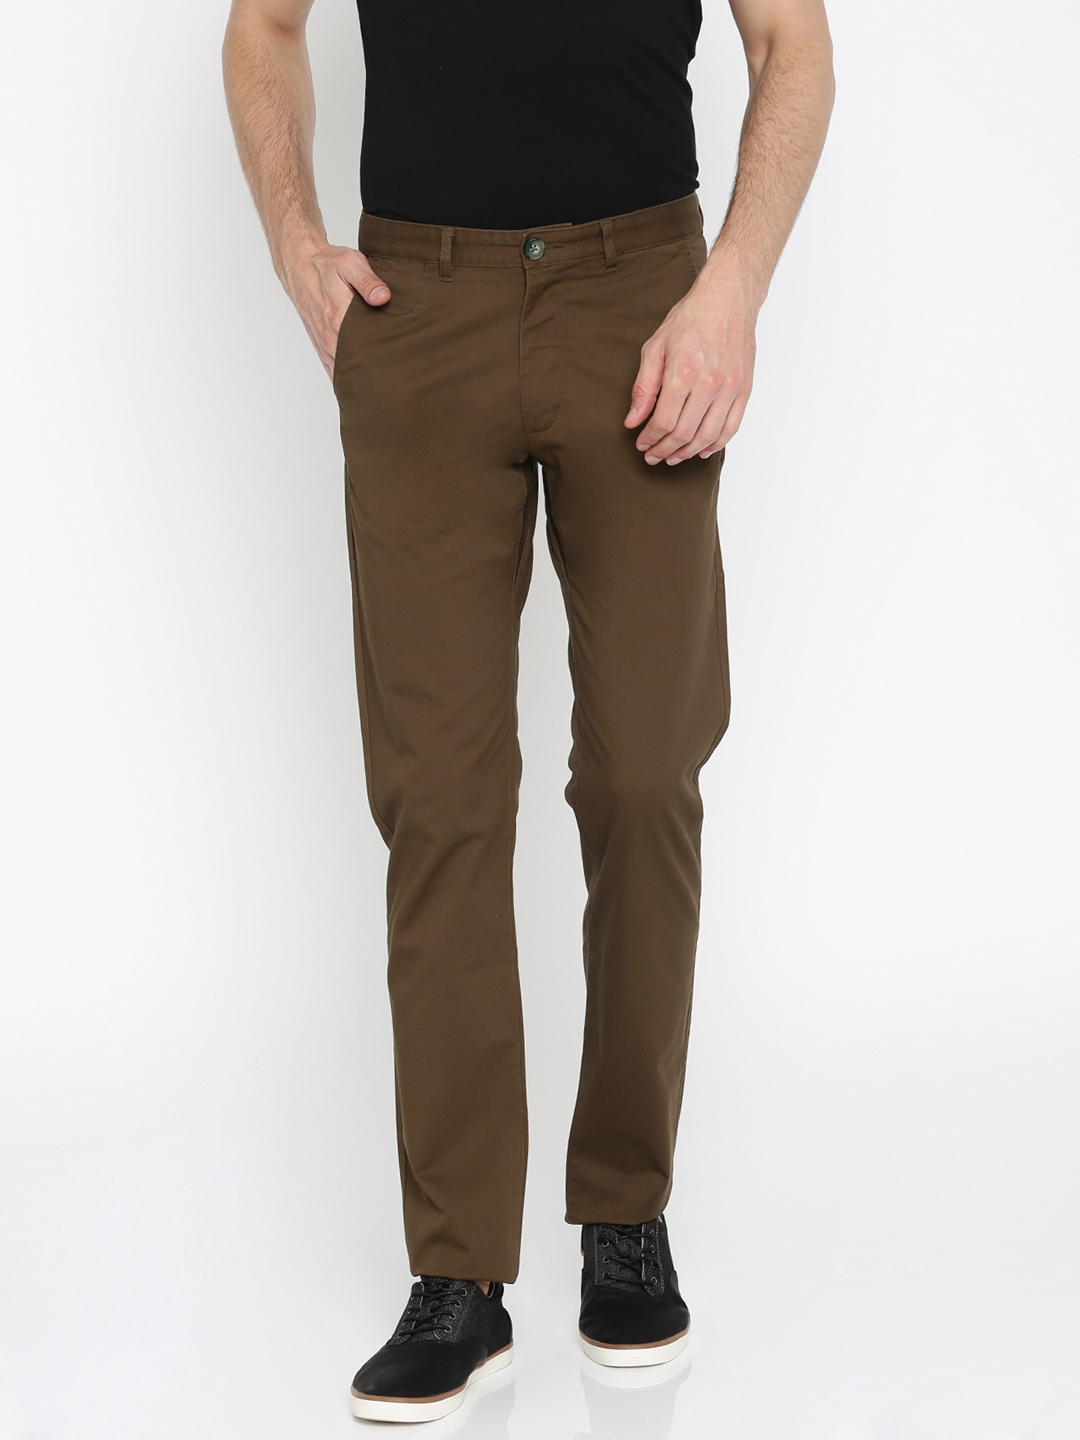 Peter England Men Khaki Solid Super Slim Fit Casual Trousers Buy Peter  England Men Khaki Solid Super Slim Fit Casual Trousers Online at Best Price  in India  NykaaMan